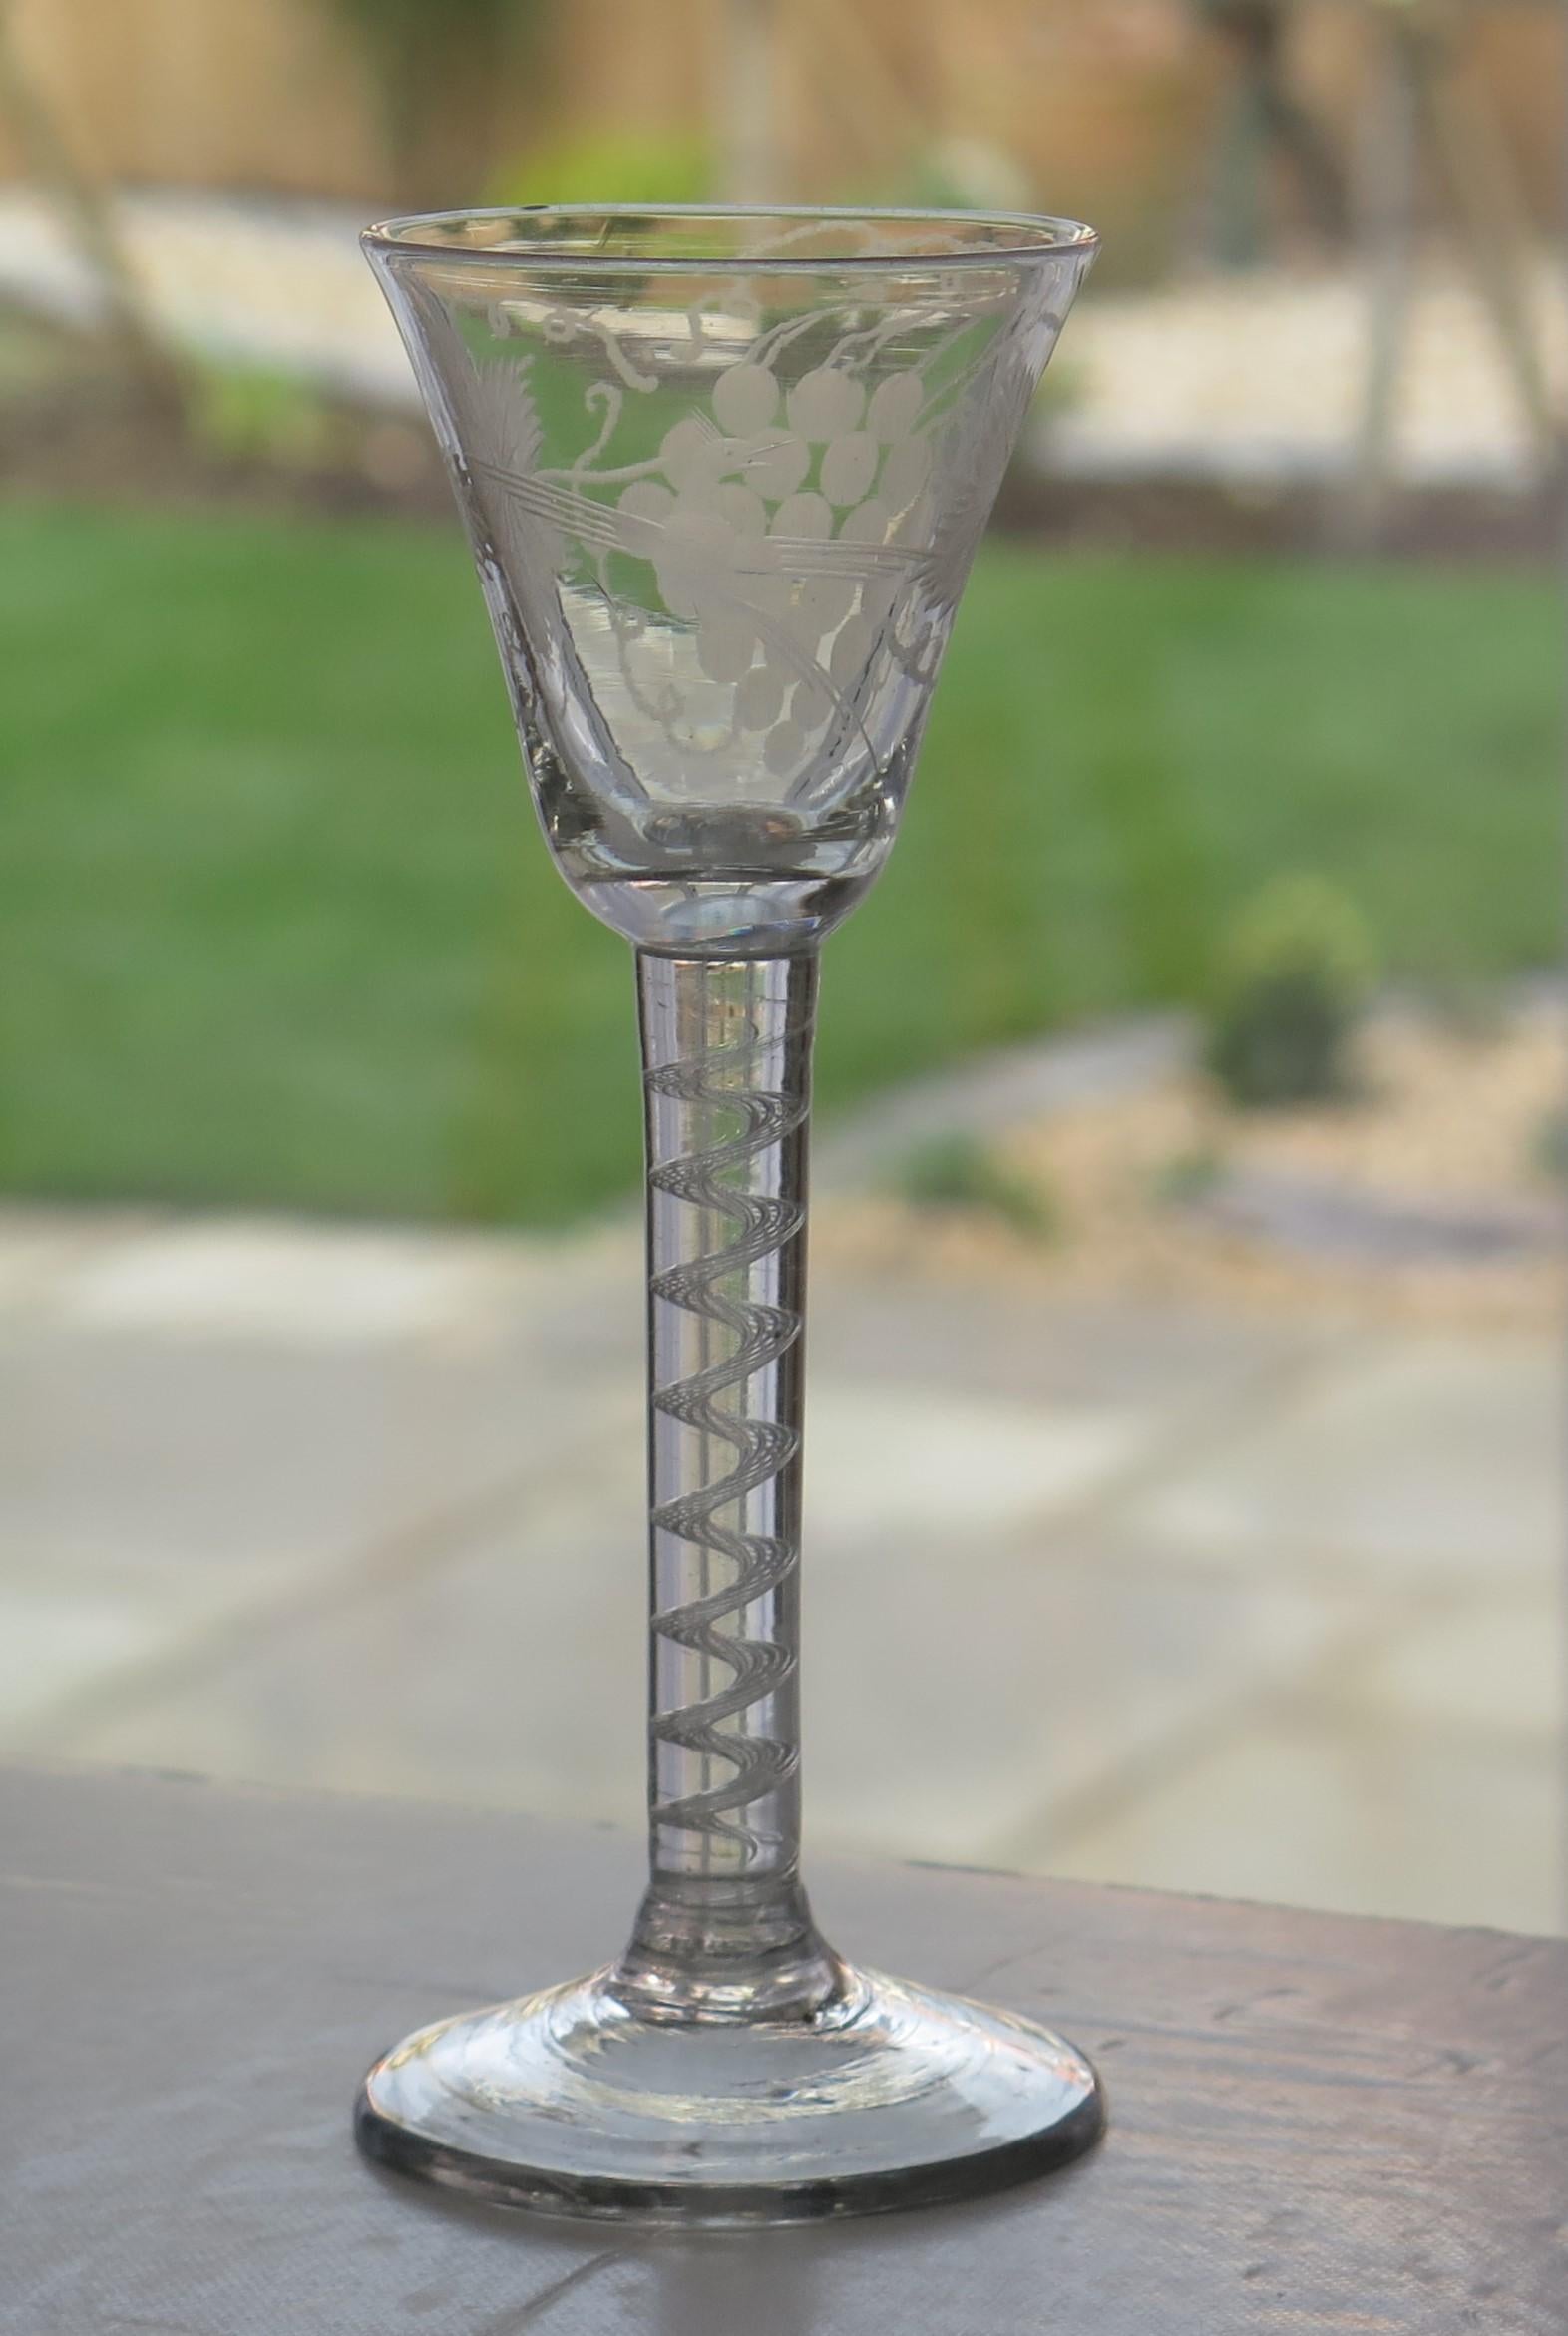 This is a very good hand-blown, English, mid-Georgian, Wine drinking glass with a round funnel (RF) engraved bowl on a single series, cotton or opaque twist (SSOT) stem, dating from the middle of the 18th century, circa 1750.

These glasses are